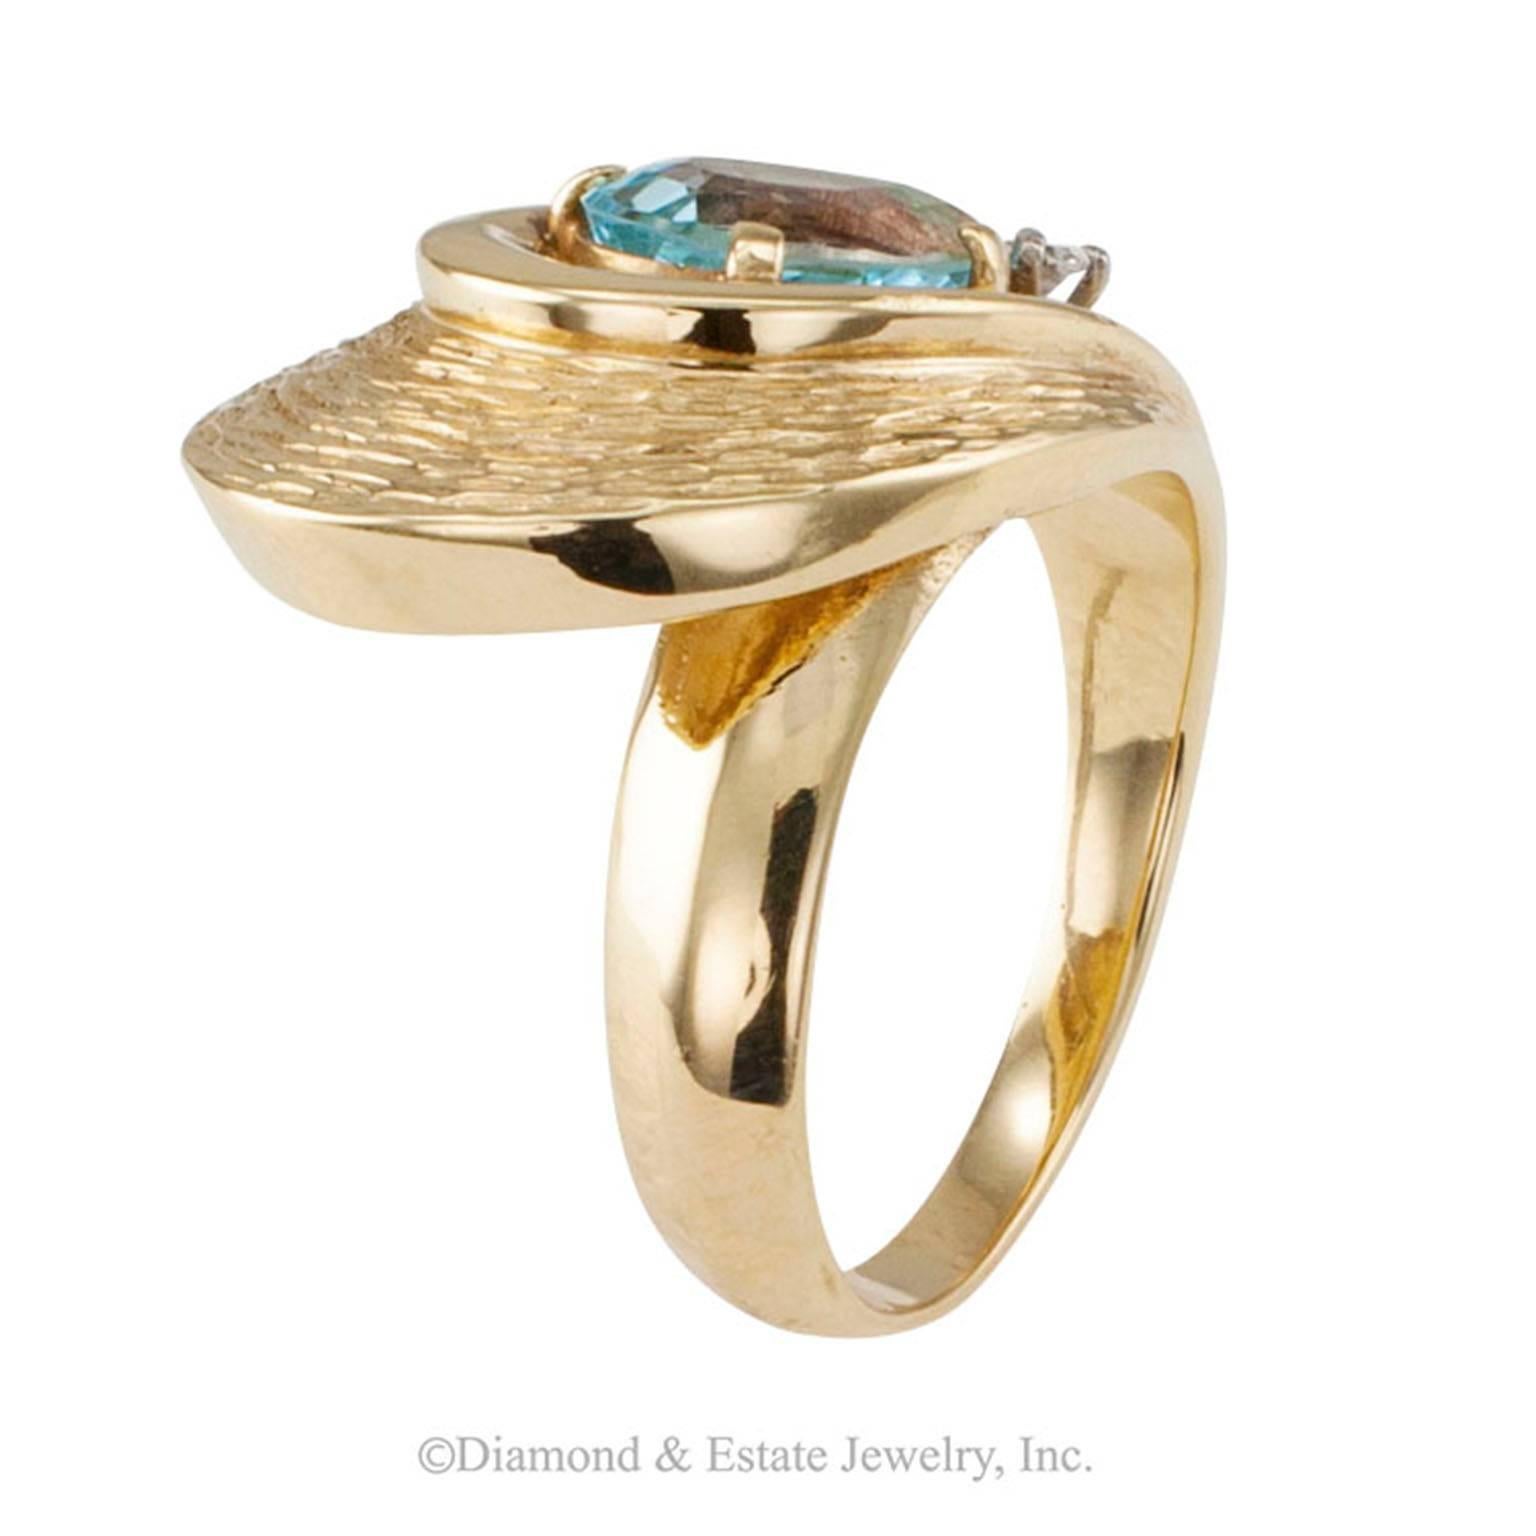 Modernist Blue Topaz and Diamond Cocktail Ring

A teardrop-shaped blue topaz and diamond cocktail ring with modernist lines, mounted in 14-karat yellow gold, circa 1960. Across the finger, swirling bands of textured gold wrap around a hollow motif